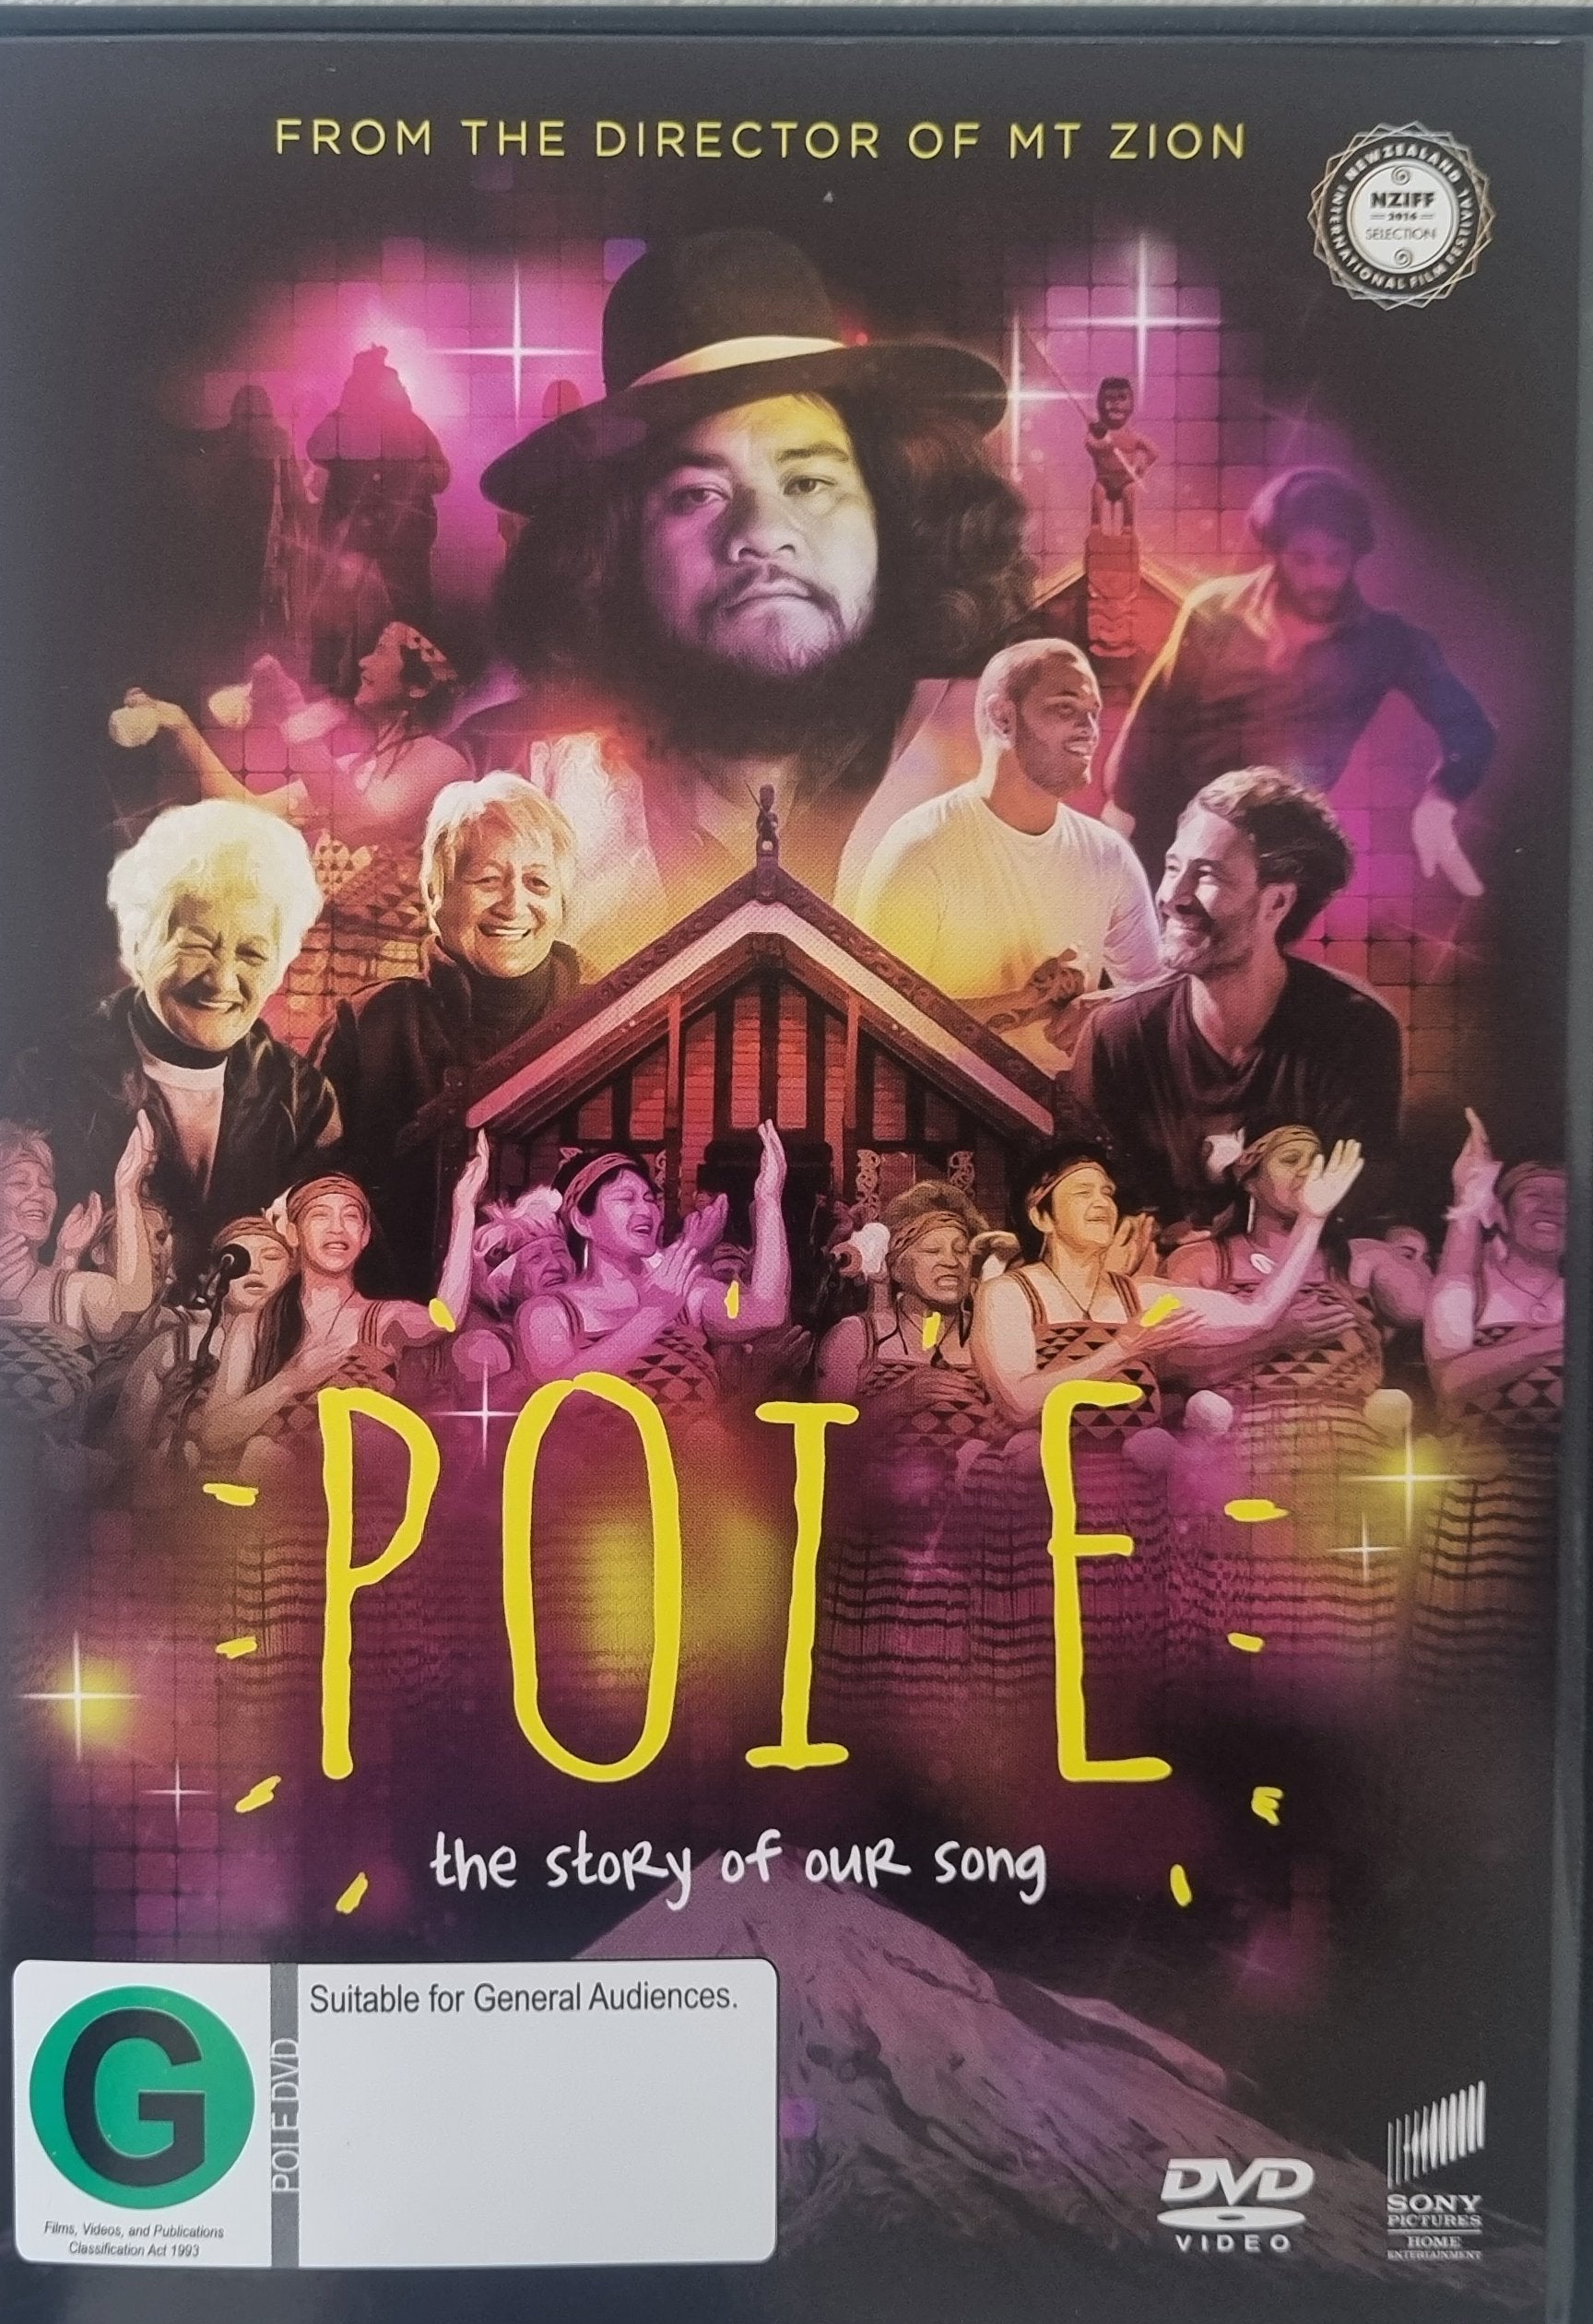 Poi E - The Story of Our Song